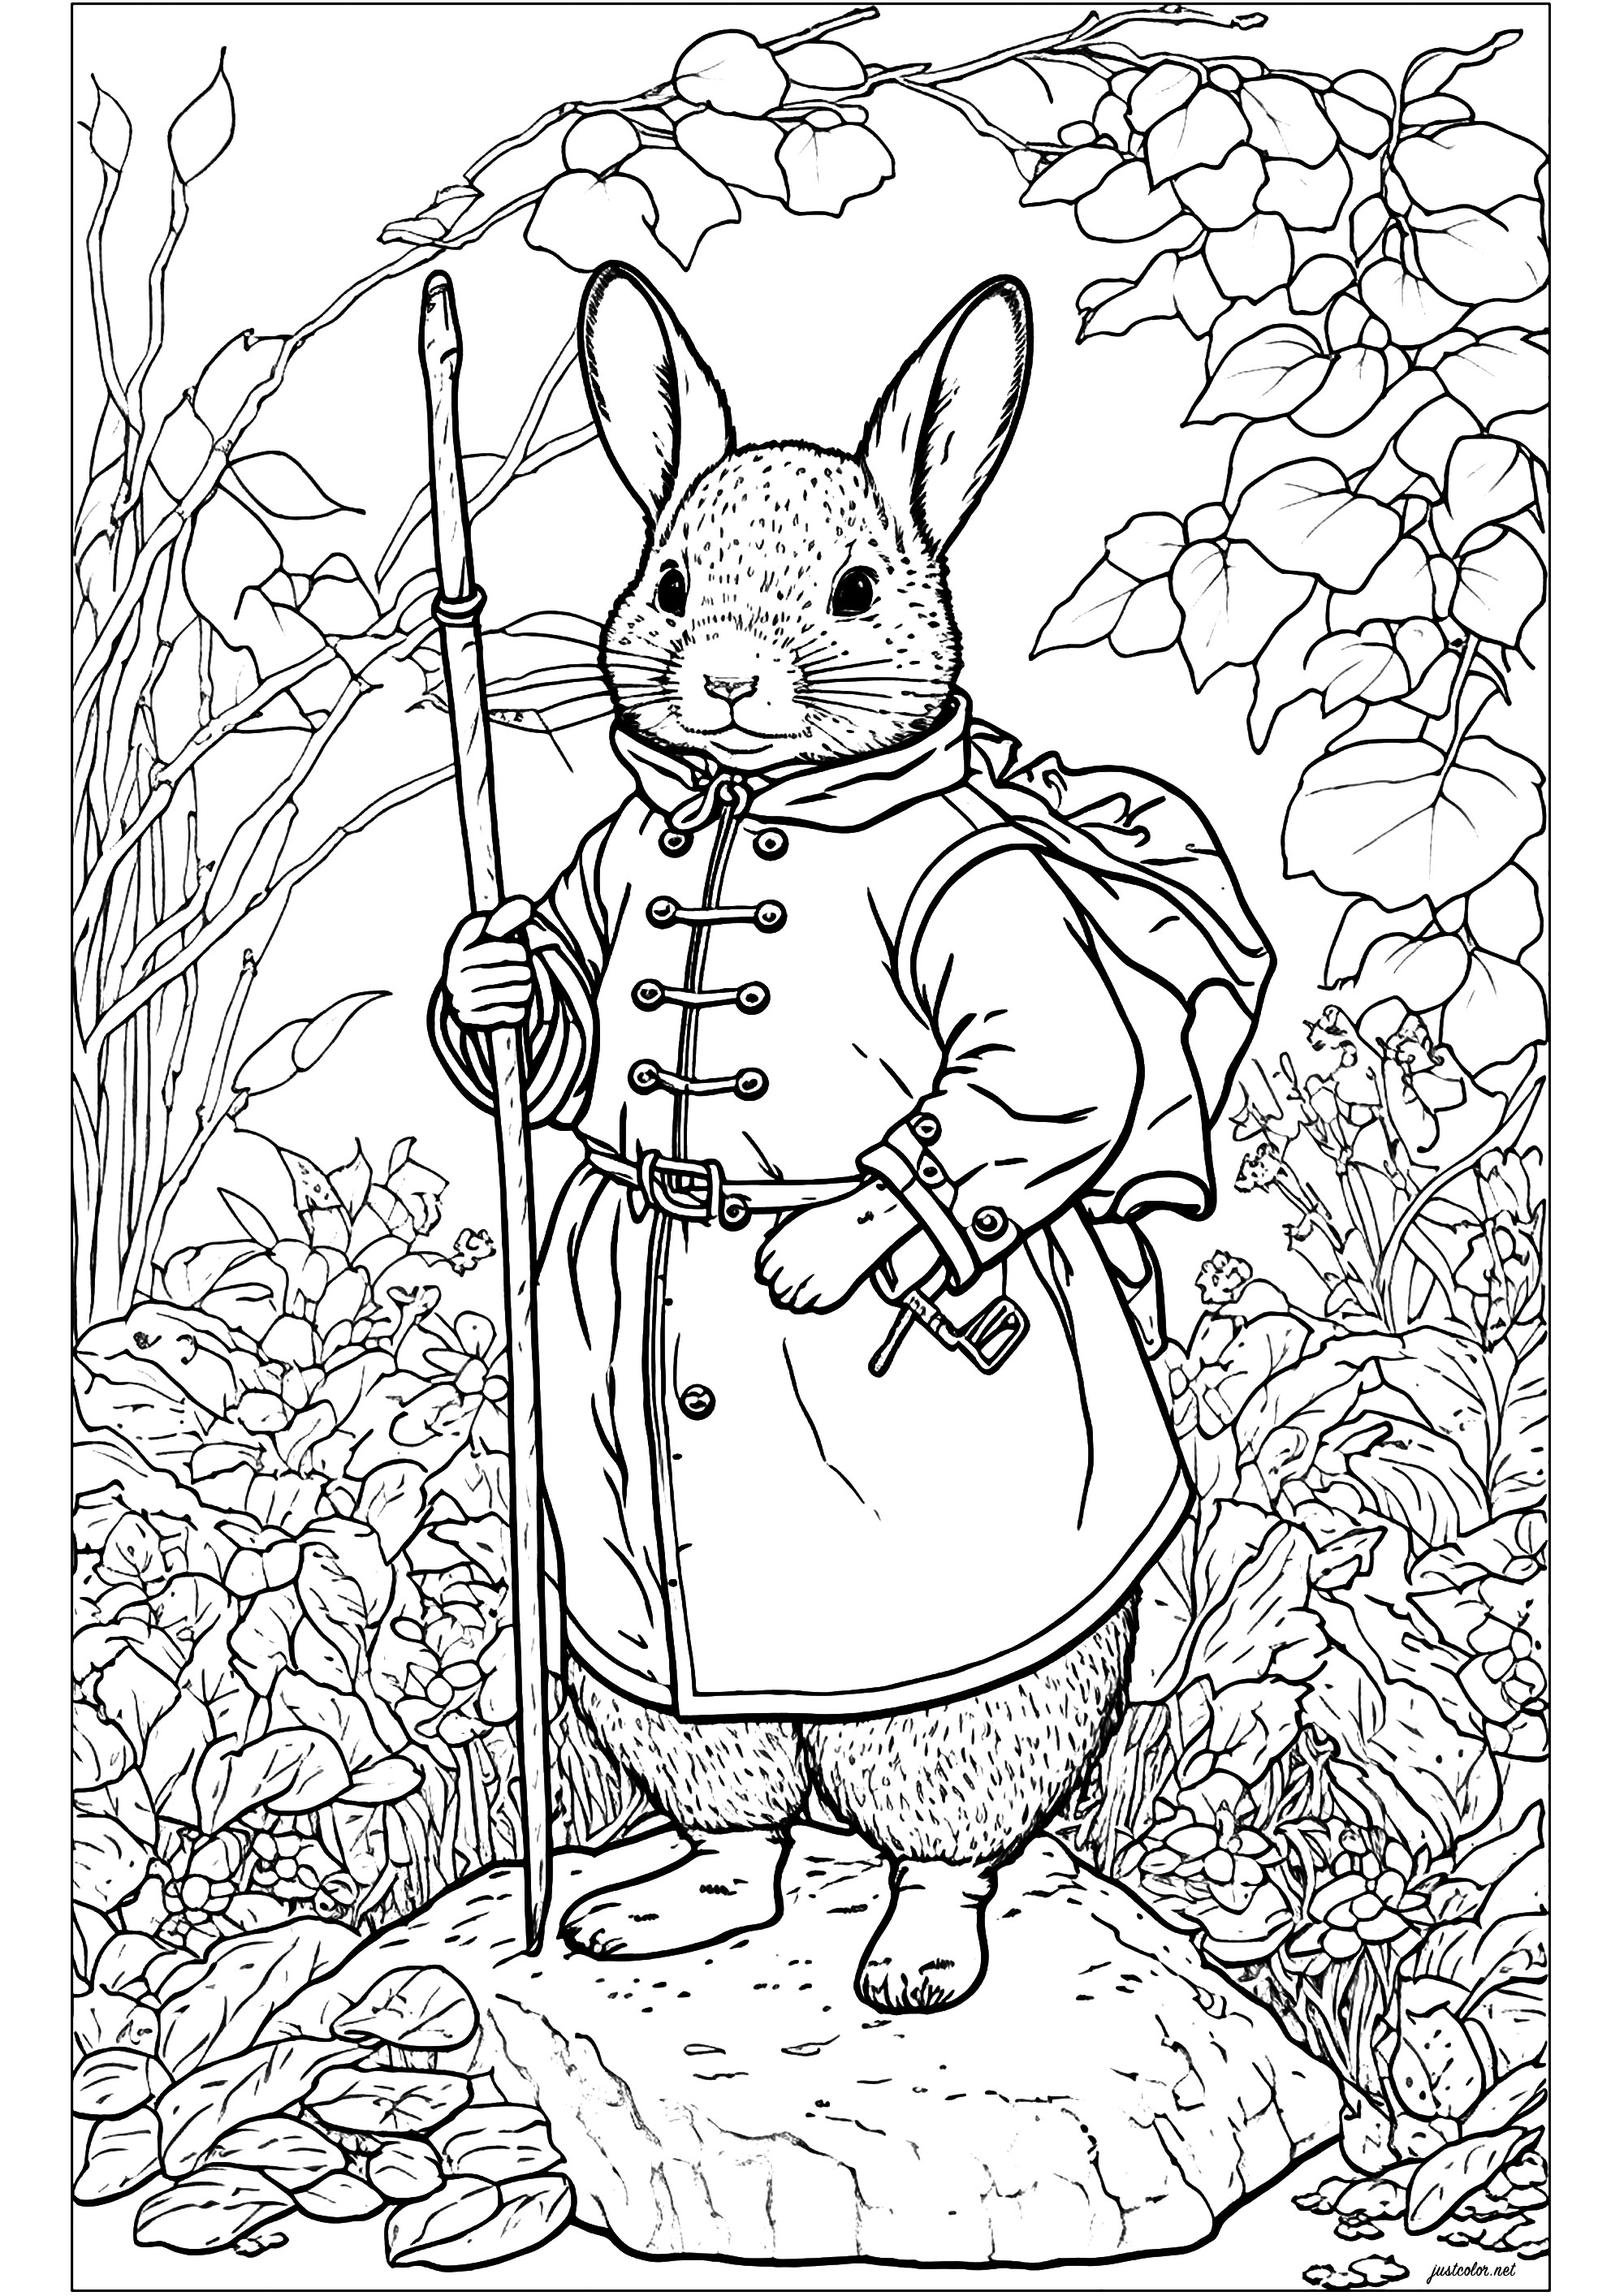 Coloring a rabbit ready for great adventures. Color this bunny dressed as an adventurer. Standing like a human, he looks straight ahead, determined and ready to set off on an adventure with his stick. Color the lush vegetation around him too.